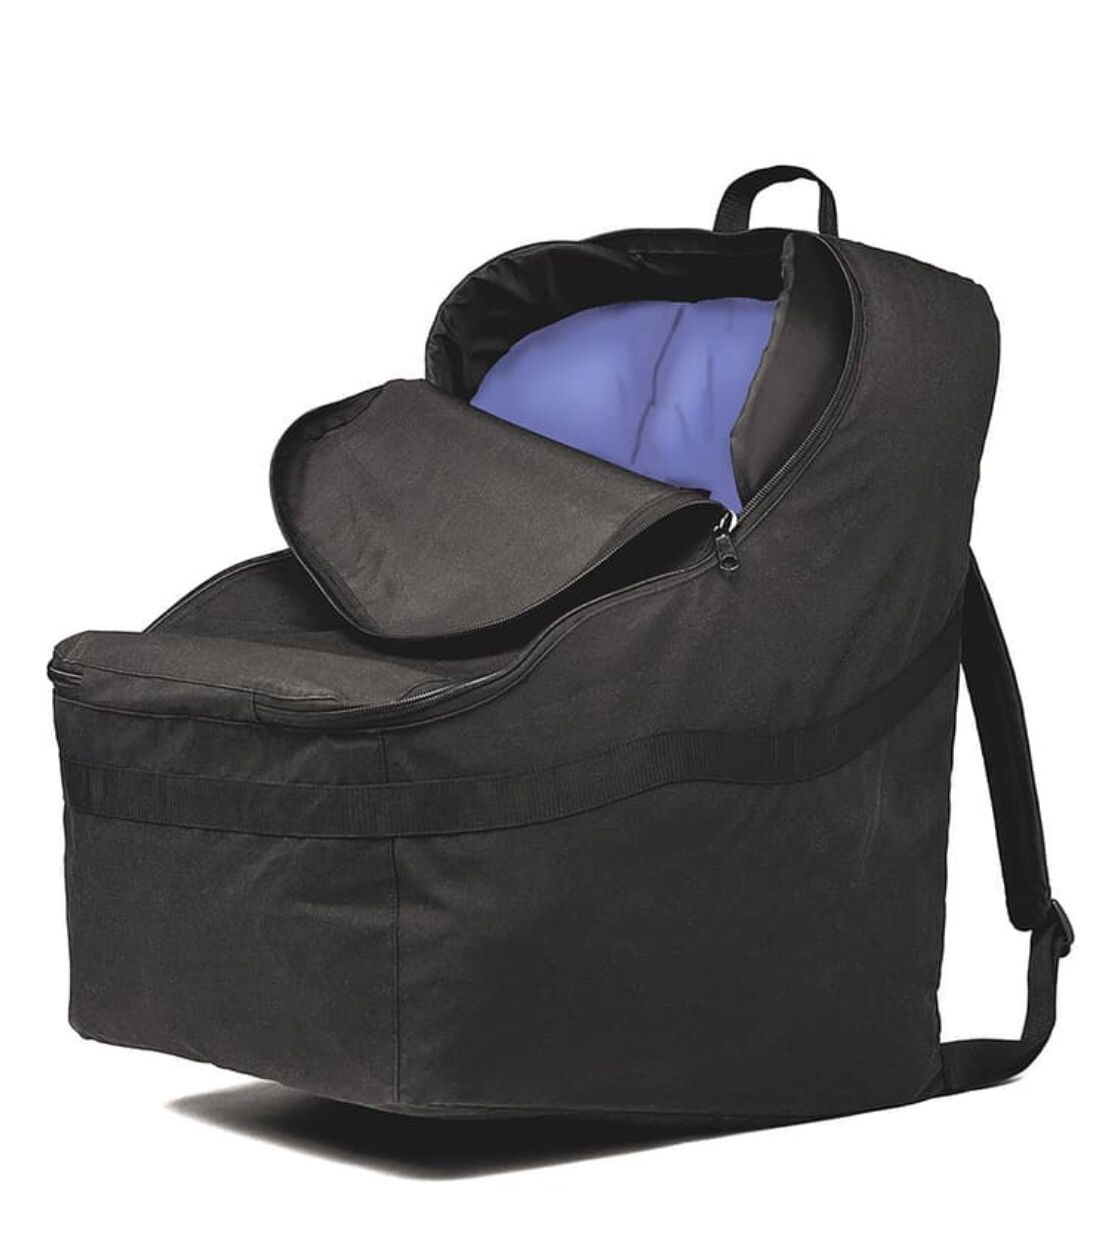 NEW - ultimate padded backpack for car seat - Retails for $60